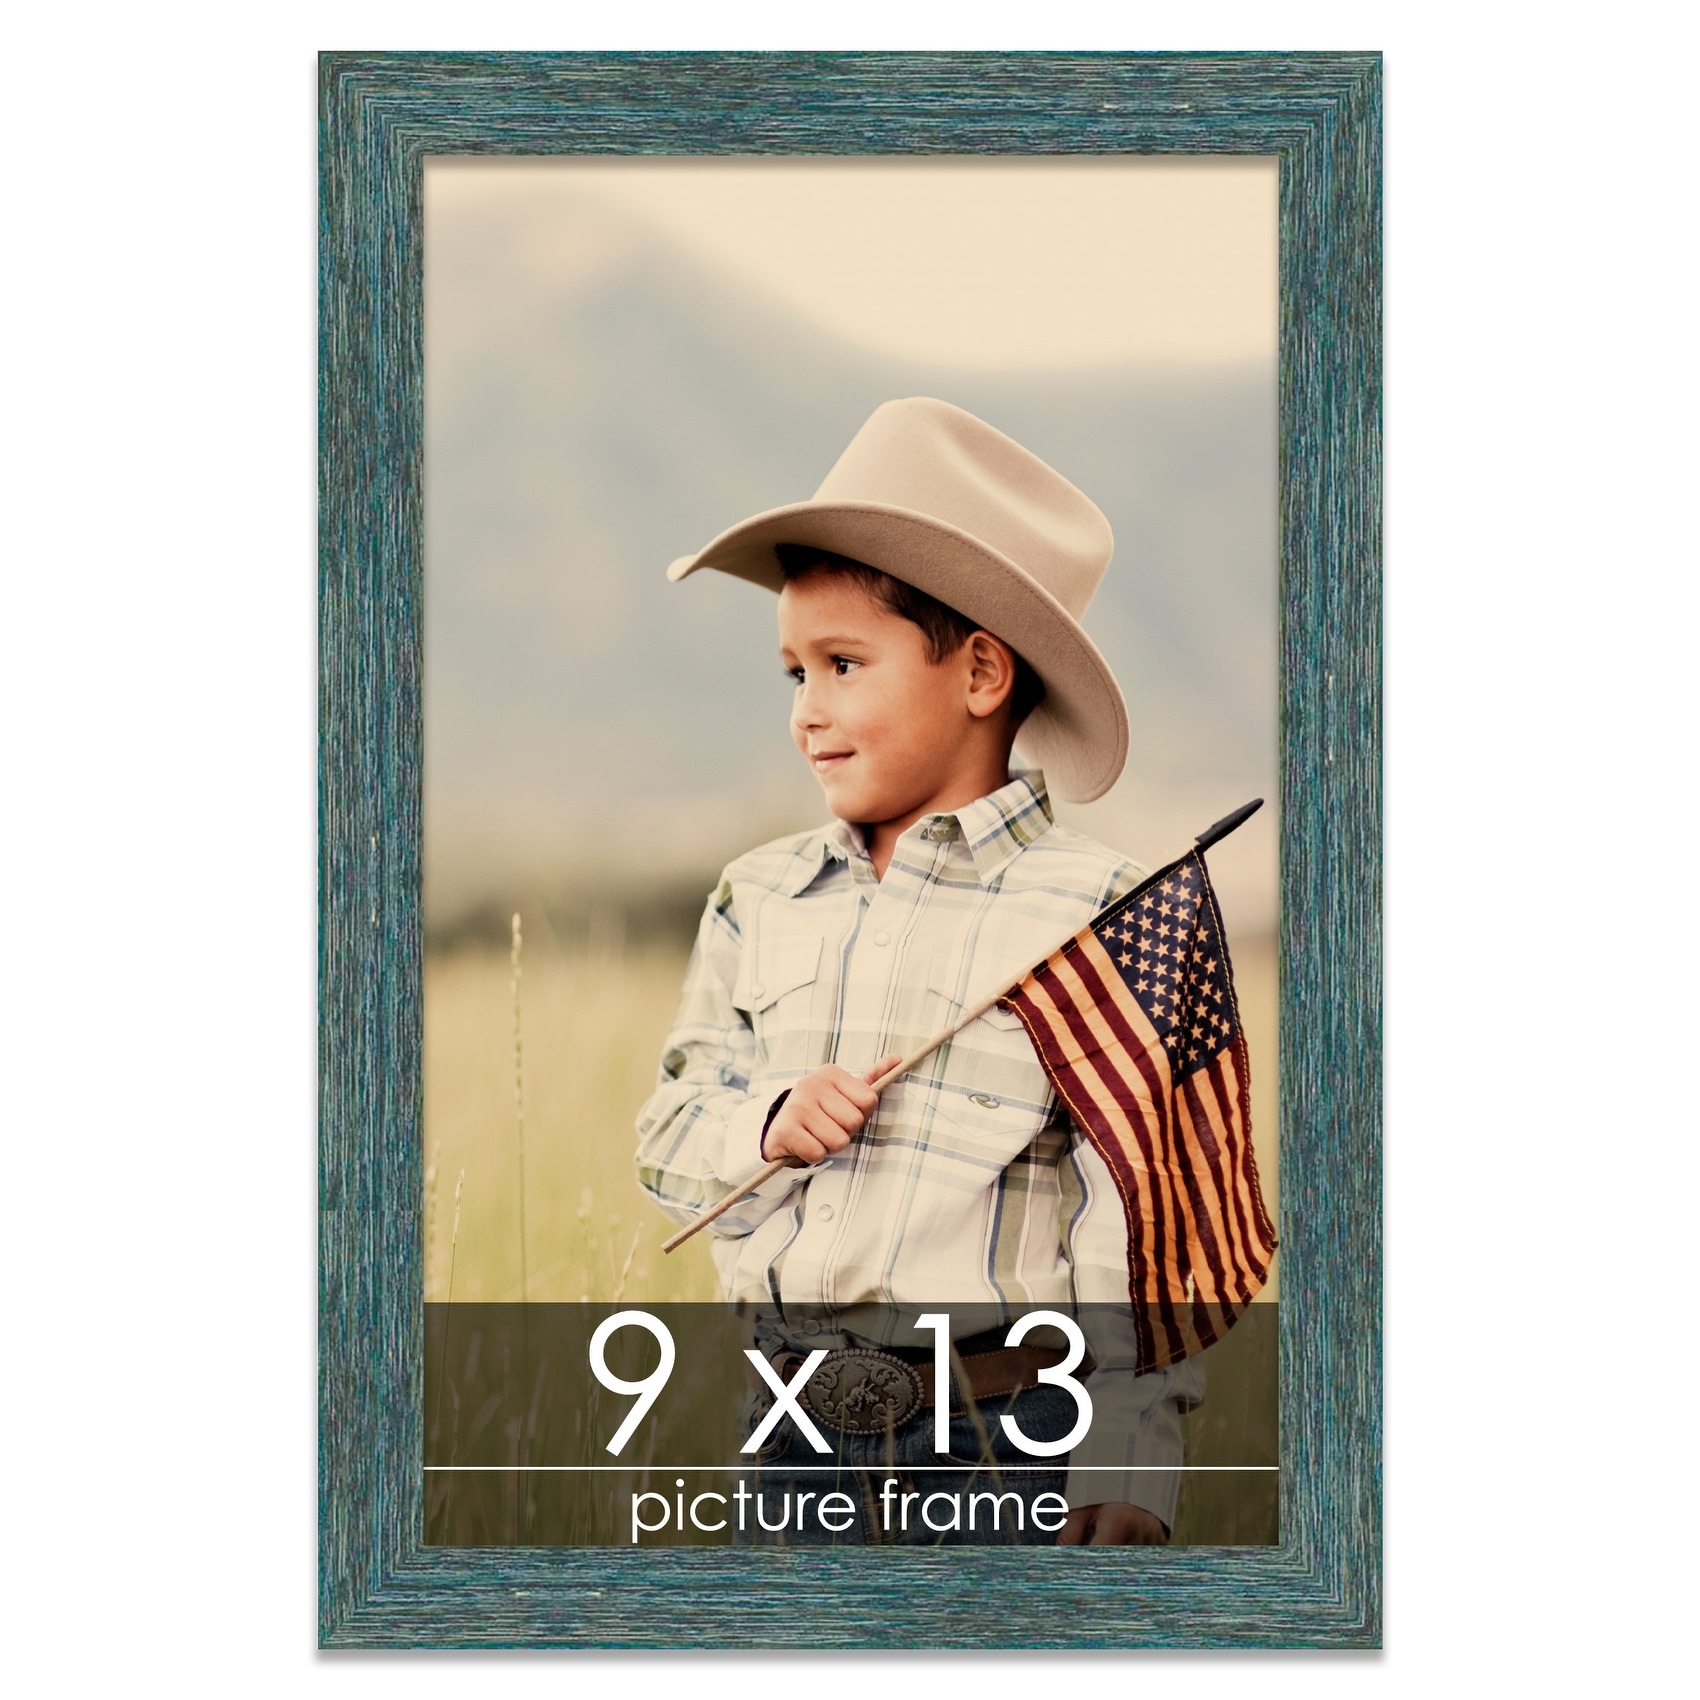 6x10 Distressed/Aged Black Complete Wood Picture Frame with UV Acrylic, Foam Board Backing, & Hardware